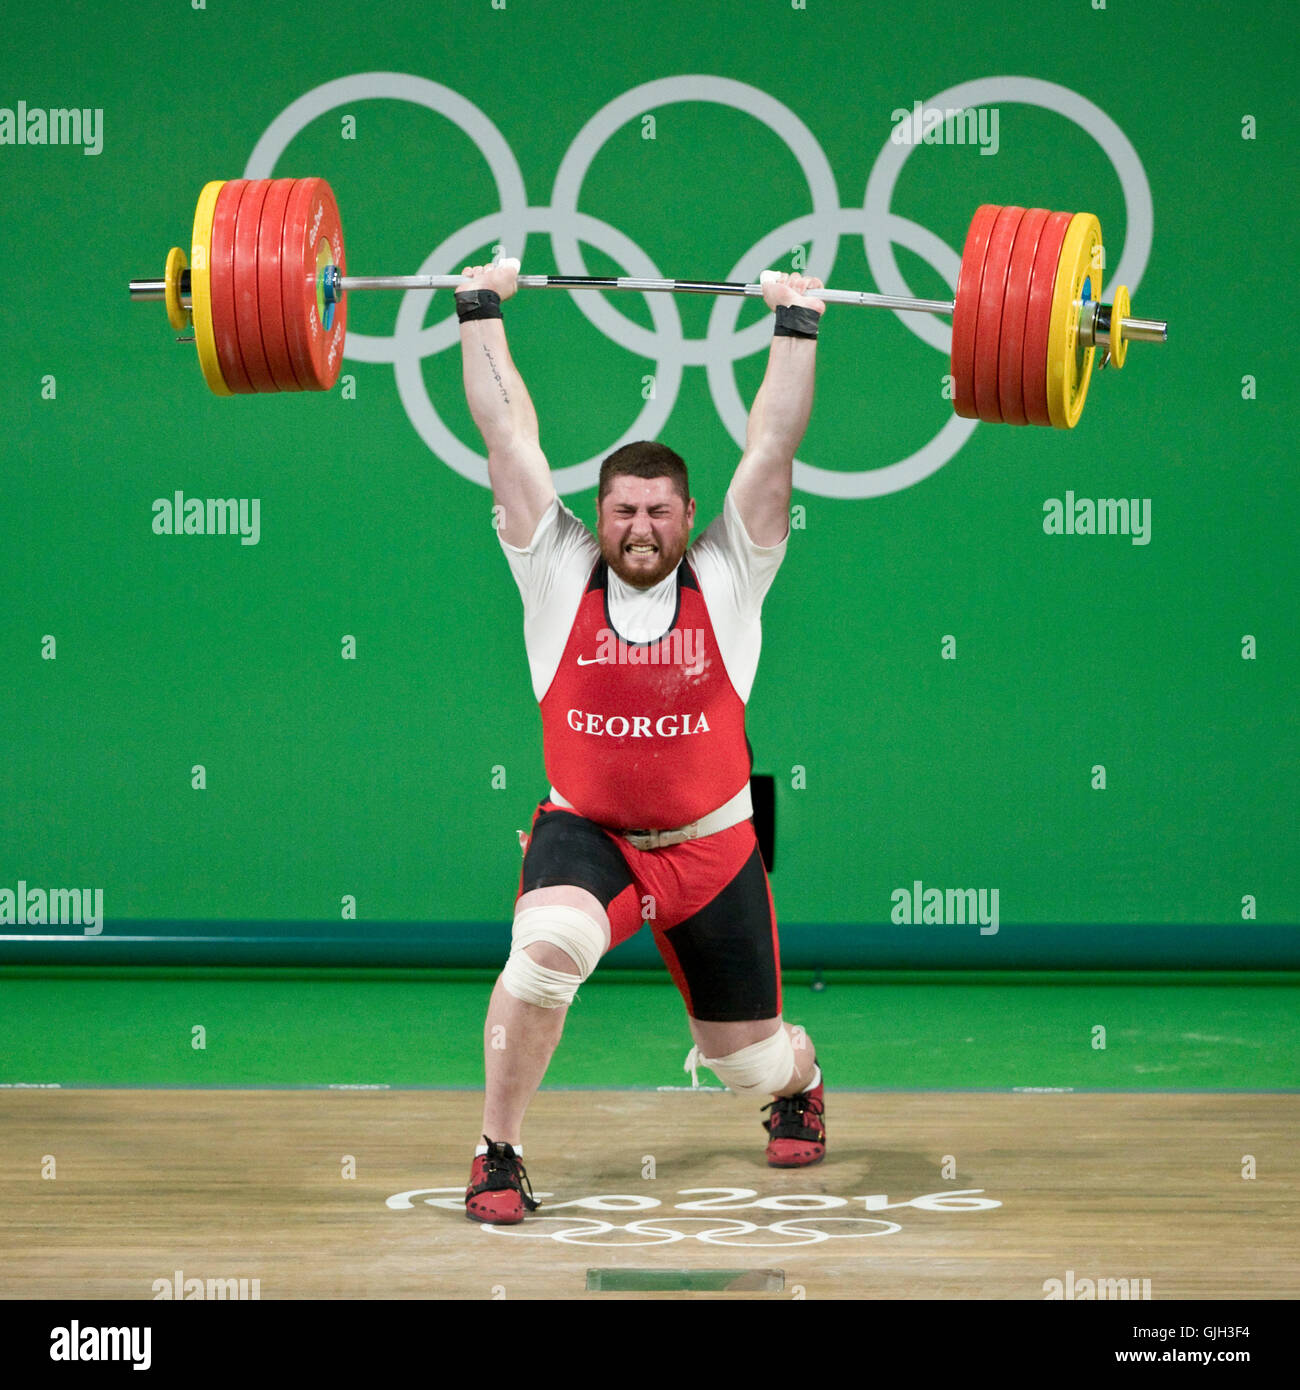 Rio de Janeiro, Brazil. 16th Aug, 2016. LASHA TALAKHADZE of Georgia sets a world record for total weight lifted (473kg), winning gold in the men's  105kg weightlifting final at the Rio 2016 Summer Olympic Games. Credit:  Paul Kitagaki Jr./ZUMA Wire/Alamy Live News Stock Photo